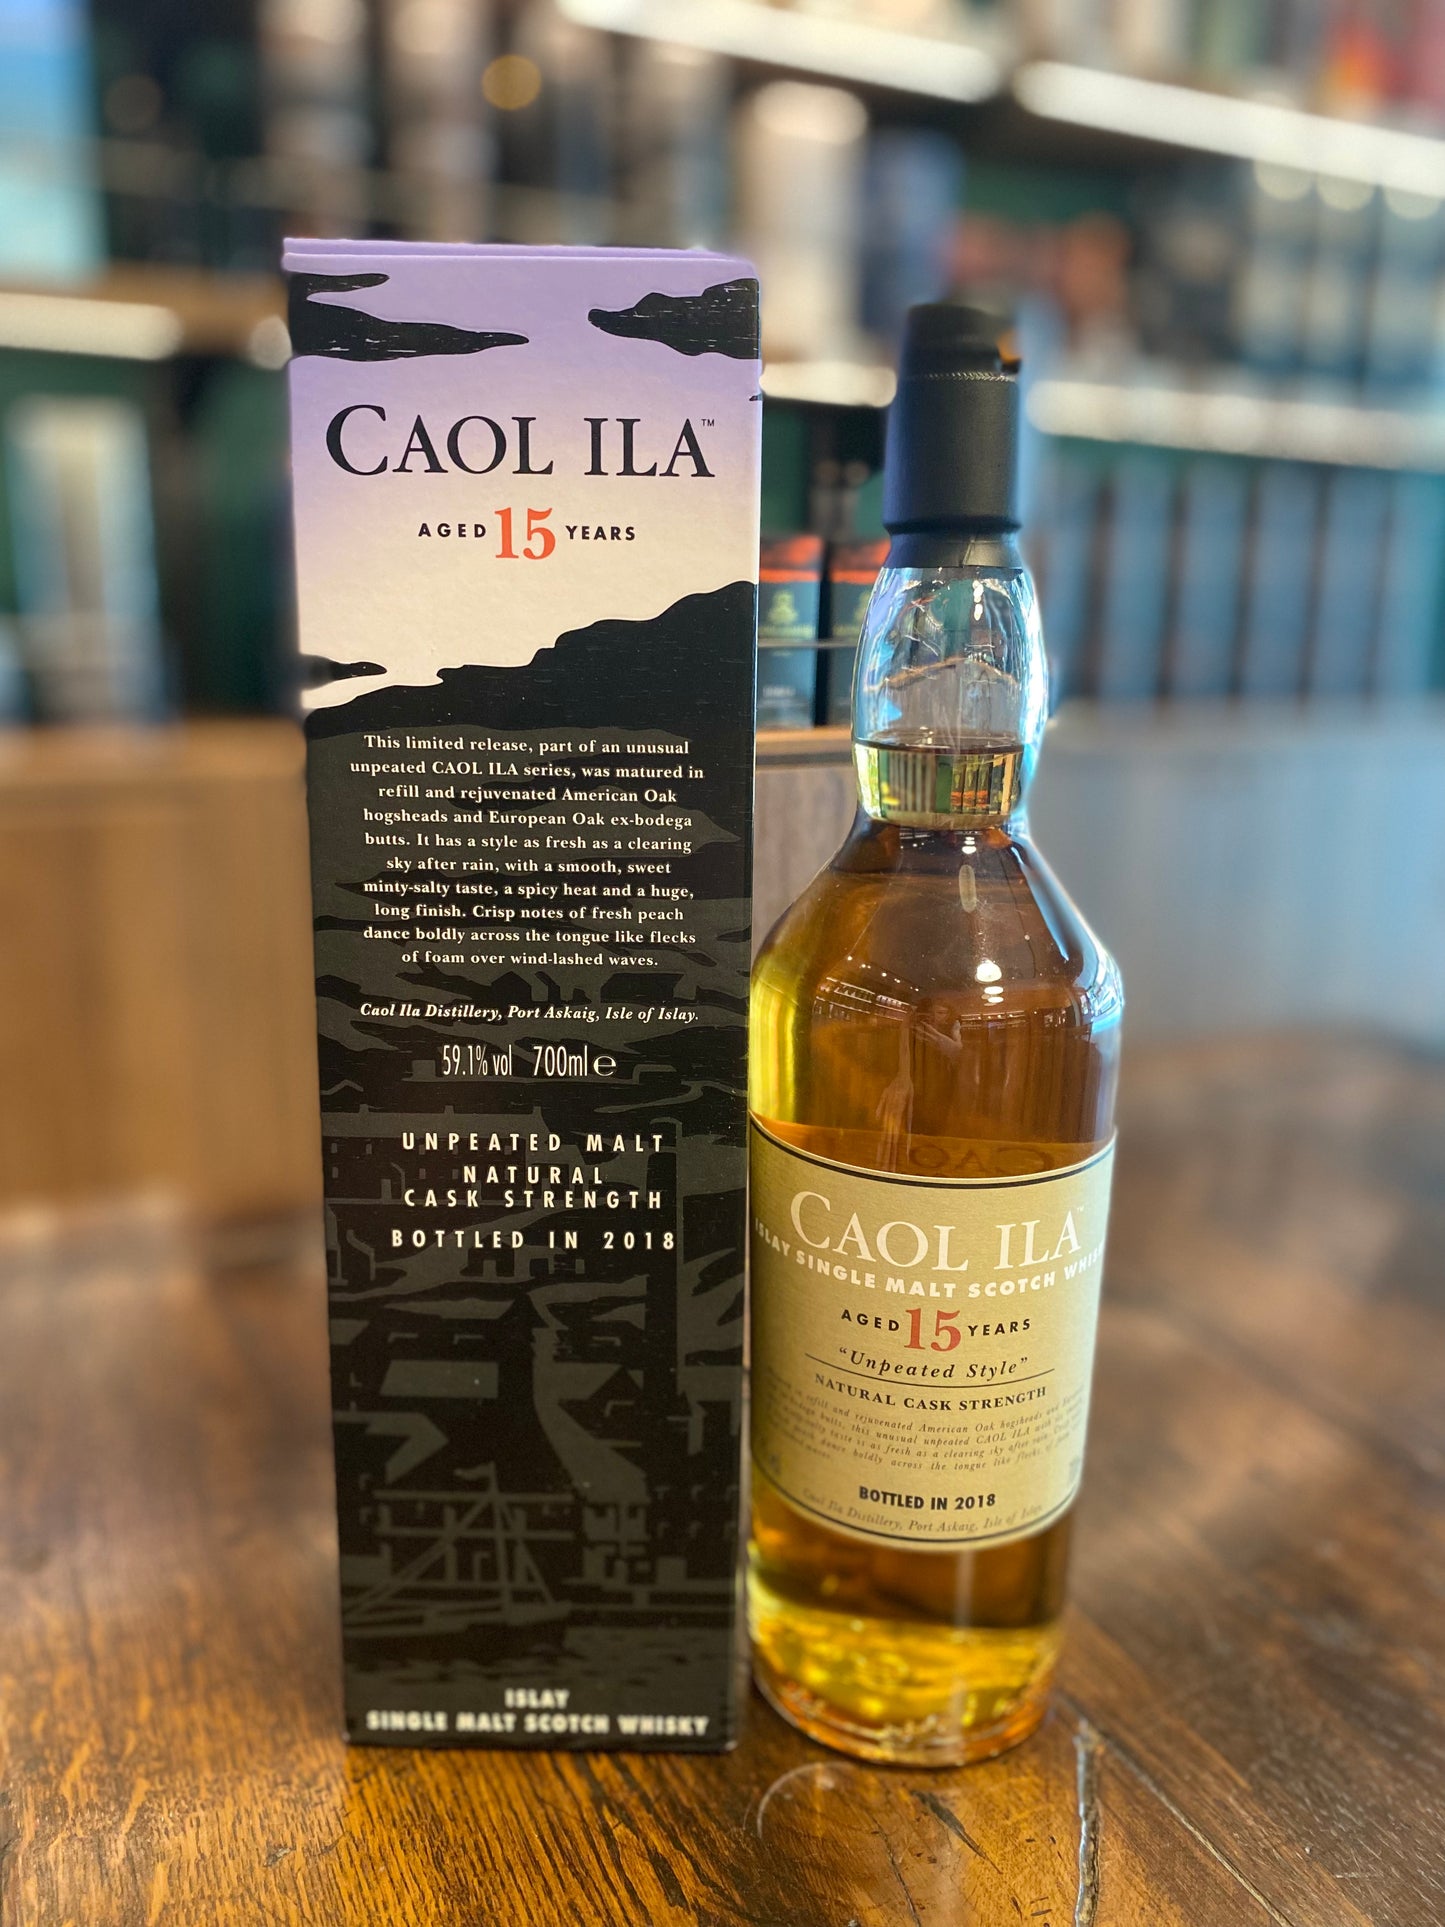 Caol ila 15-year-old original wine 2018 winery annual limited selection, 700ml, 59.1% (no peat)